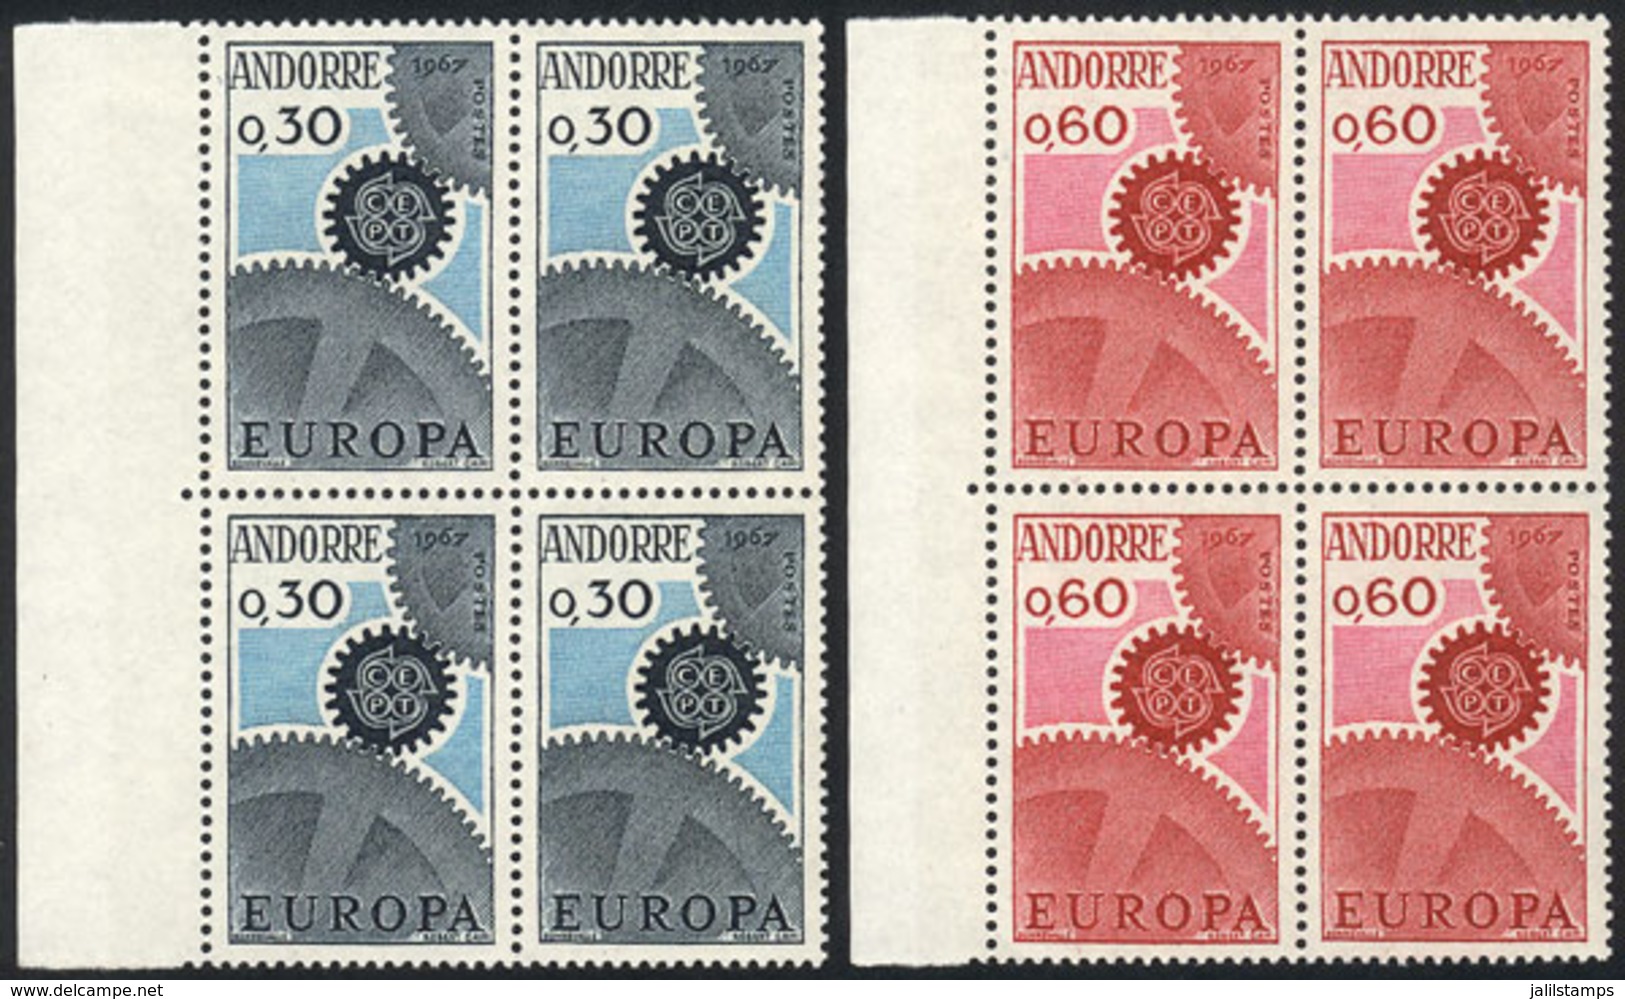 FRENCH ANDORRA: Yvert 179/180, 1967 Topic Europa, MNH Blocks Of 4, Excellent Quality, Catalog Value Euros 100. - Nuevos